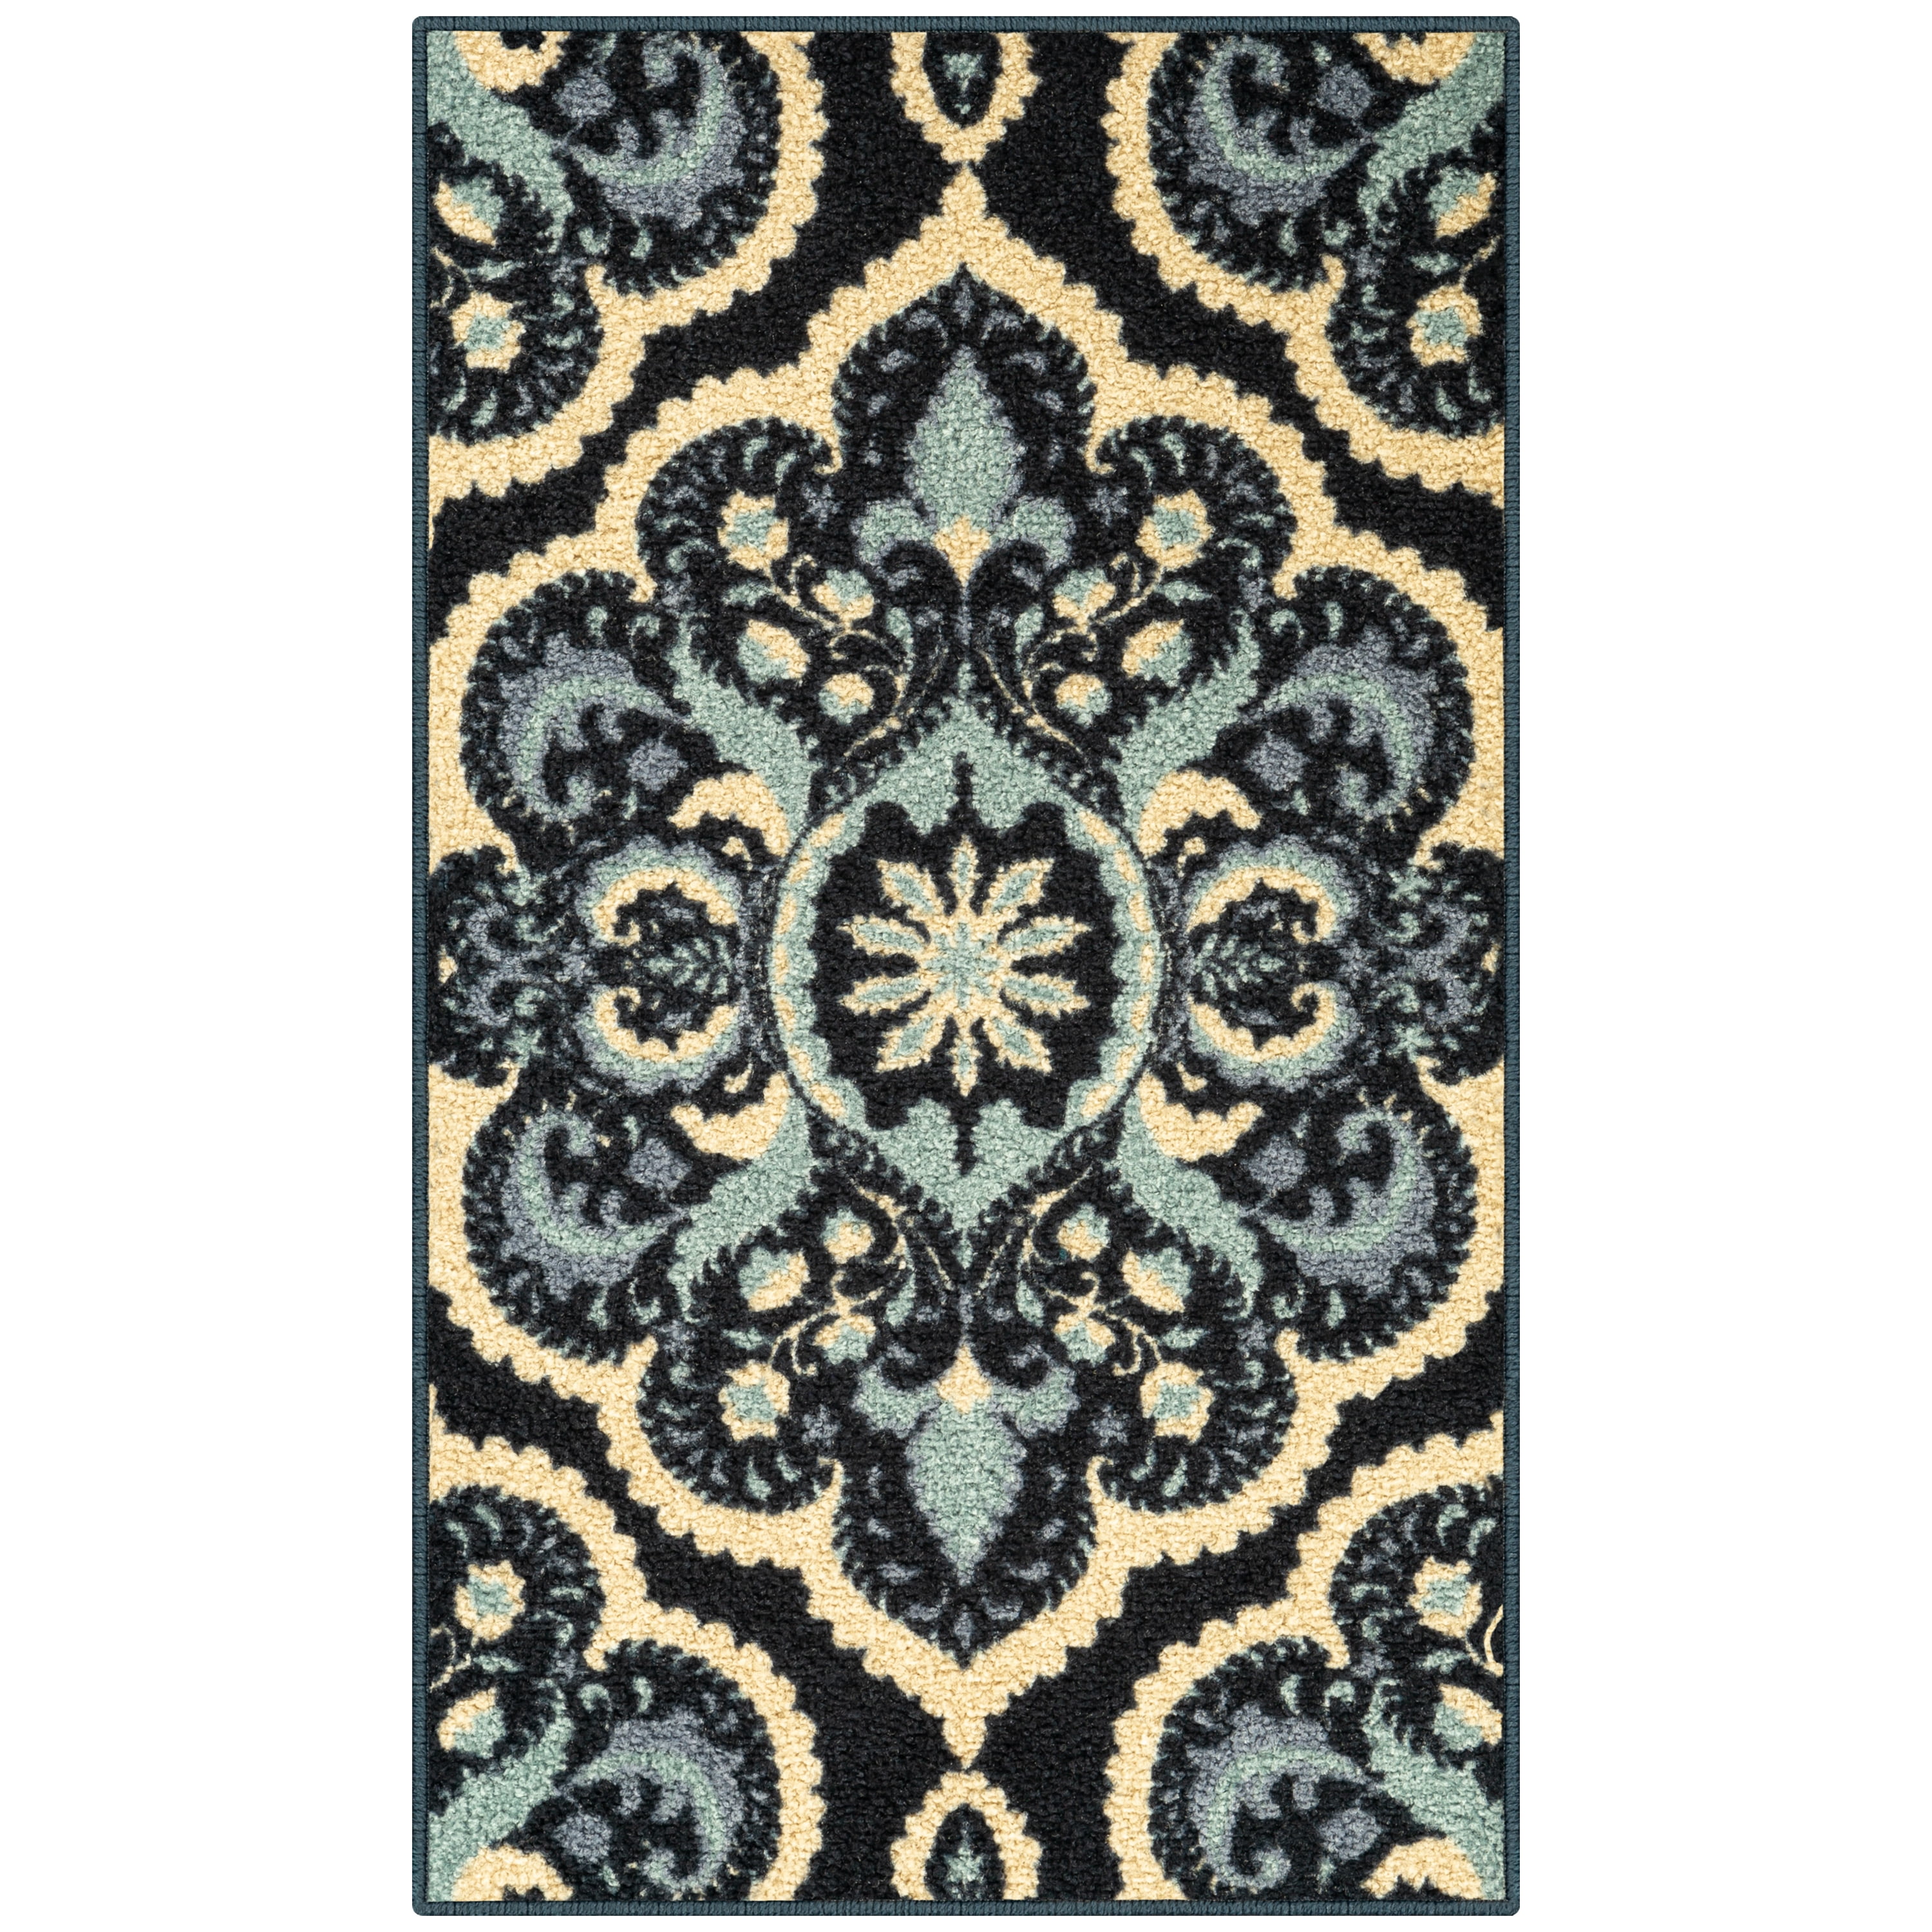 Hall Runner KARMEL COFFEE NUT Width 70-120cm ABSTRACT extra long thick soft RUGS 